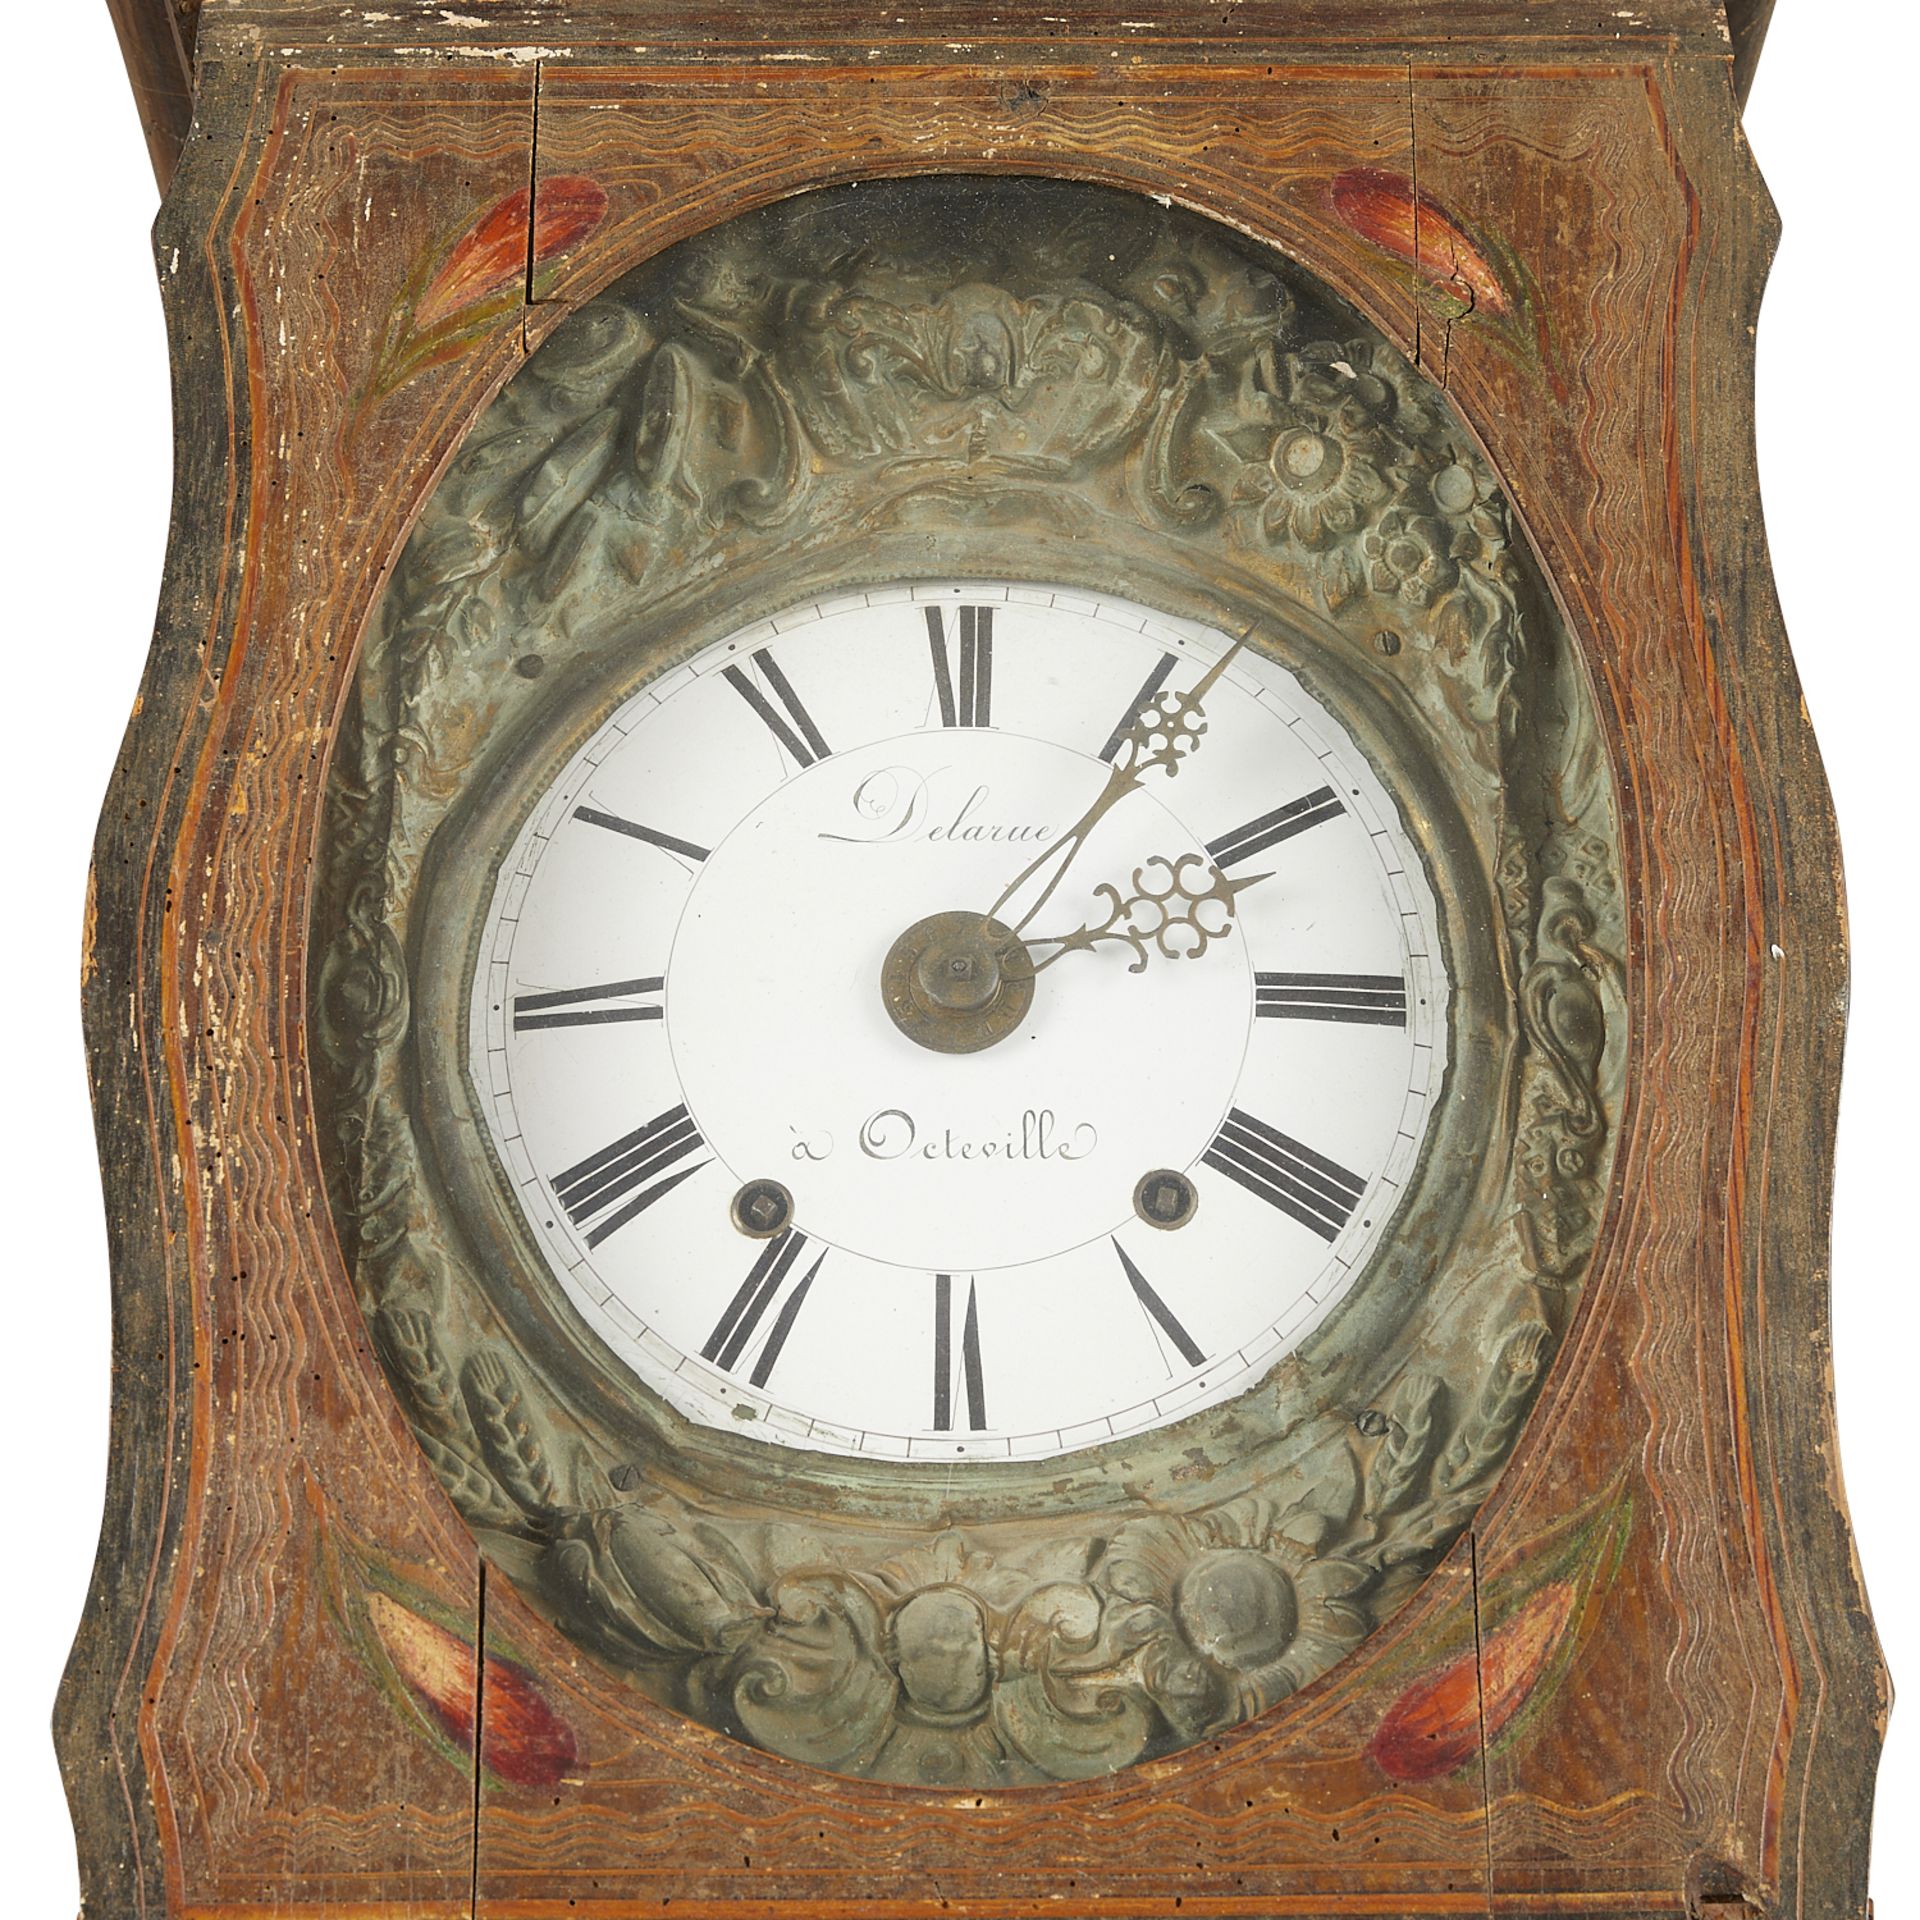 Delarue French Country Painted Grandfather Clock - Image 12 of 22